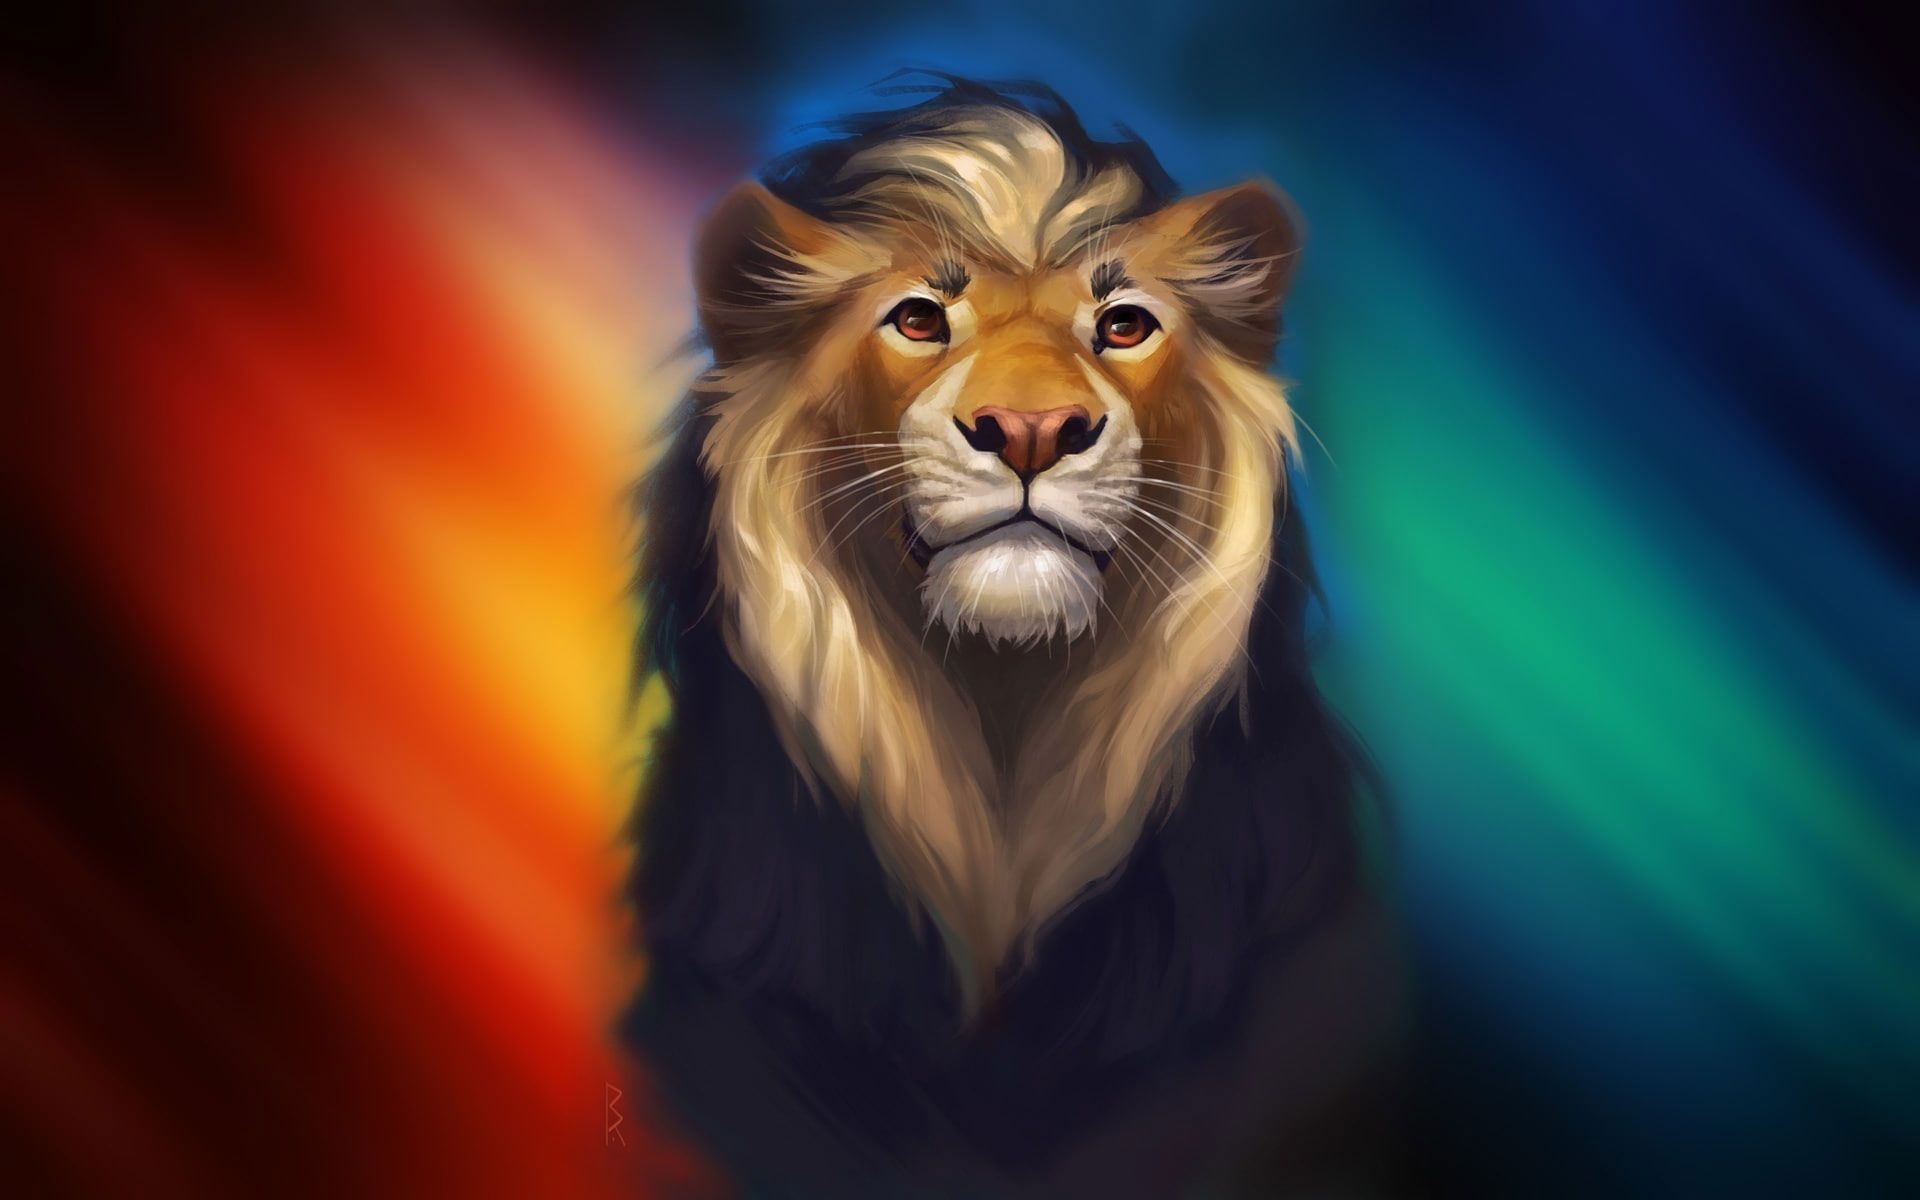 A digital painting of a lion in front of a rainbow background - Lion